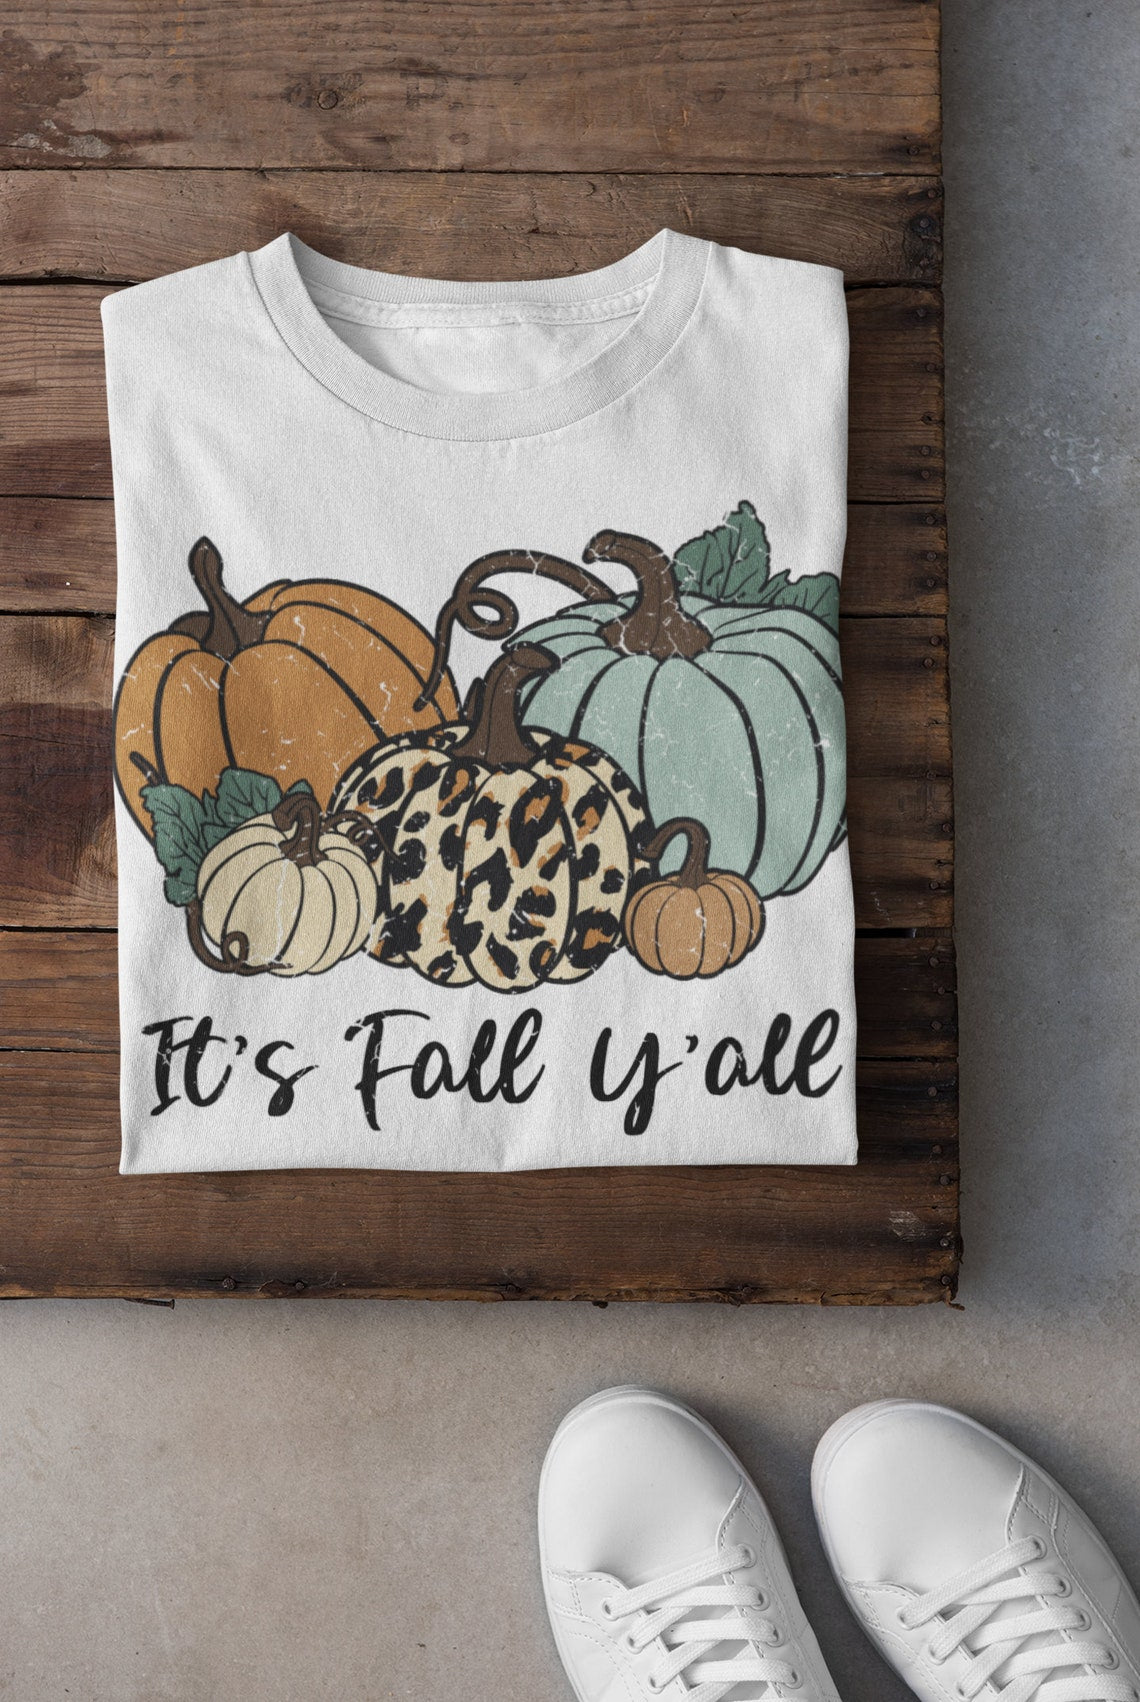 It's Fall Y'all Tee/ Softstyle Fall Tee/ Fall T-Shirt with Pumpkins / Leopard Pumpkins